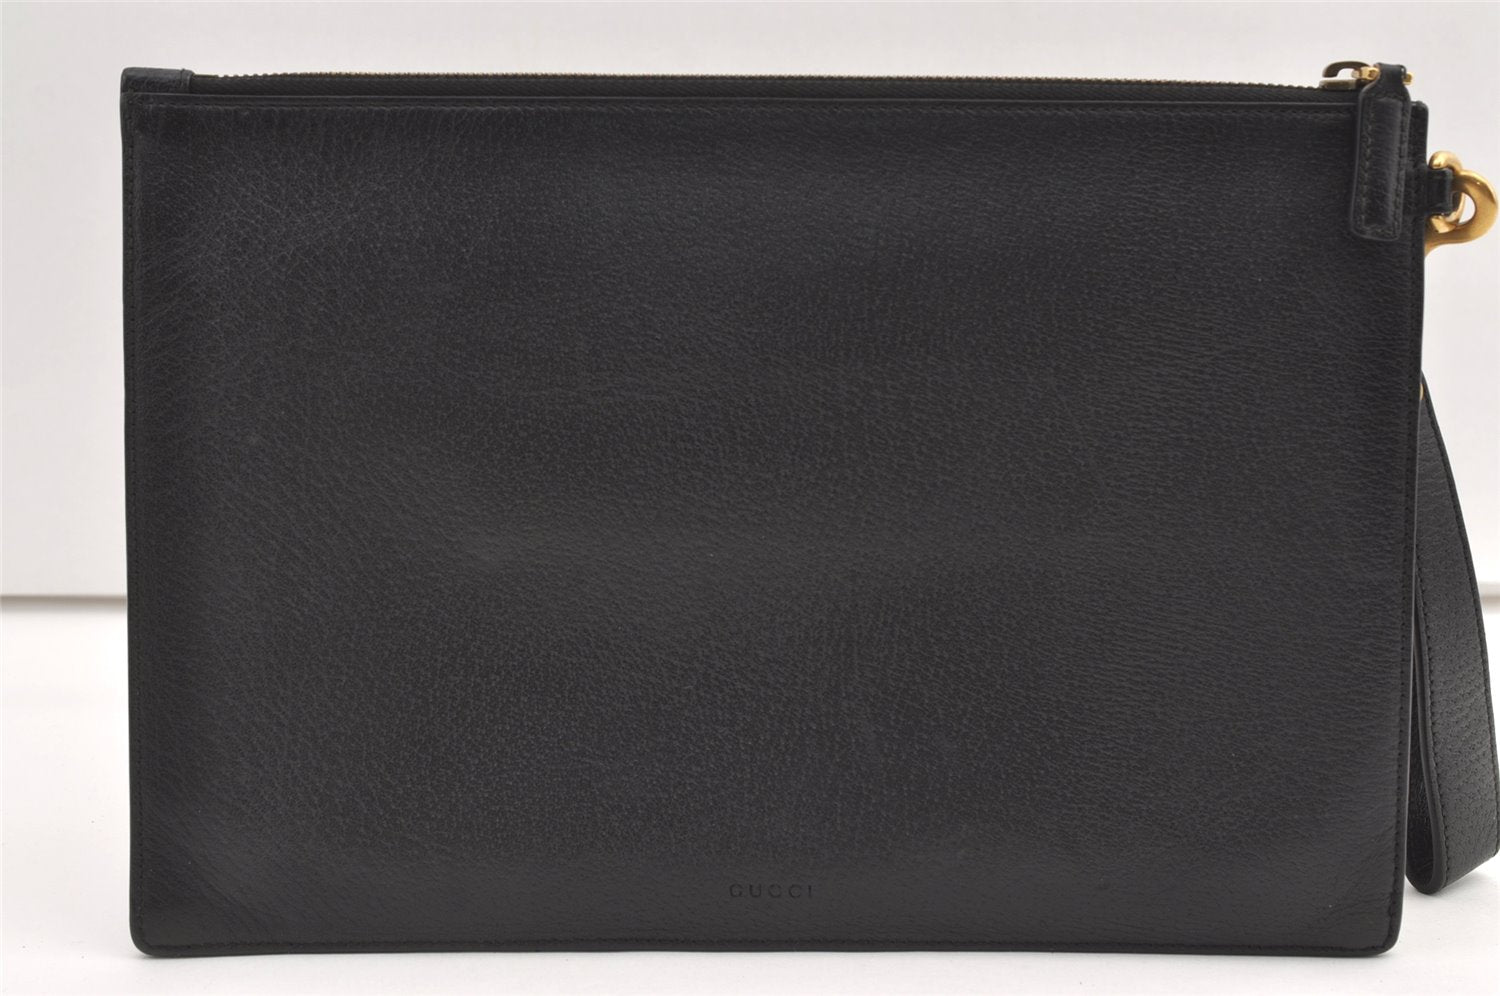 Authentic GUCCI GG Marmont Double G Clutch Hand Bag Leather 475317 Black 0219K